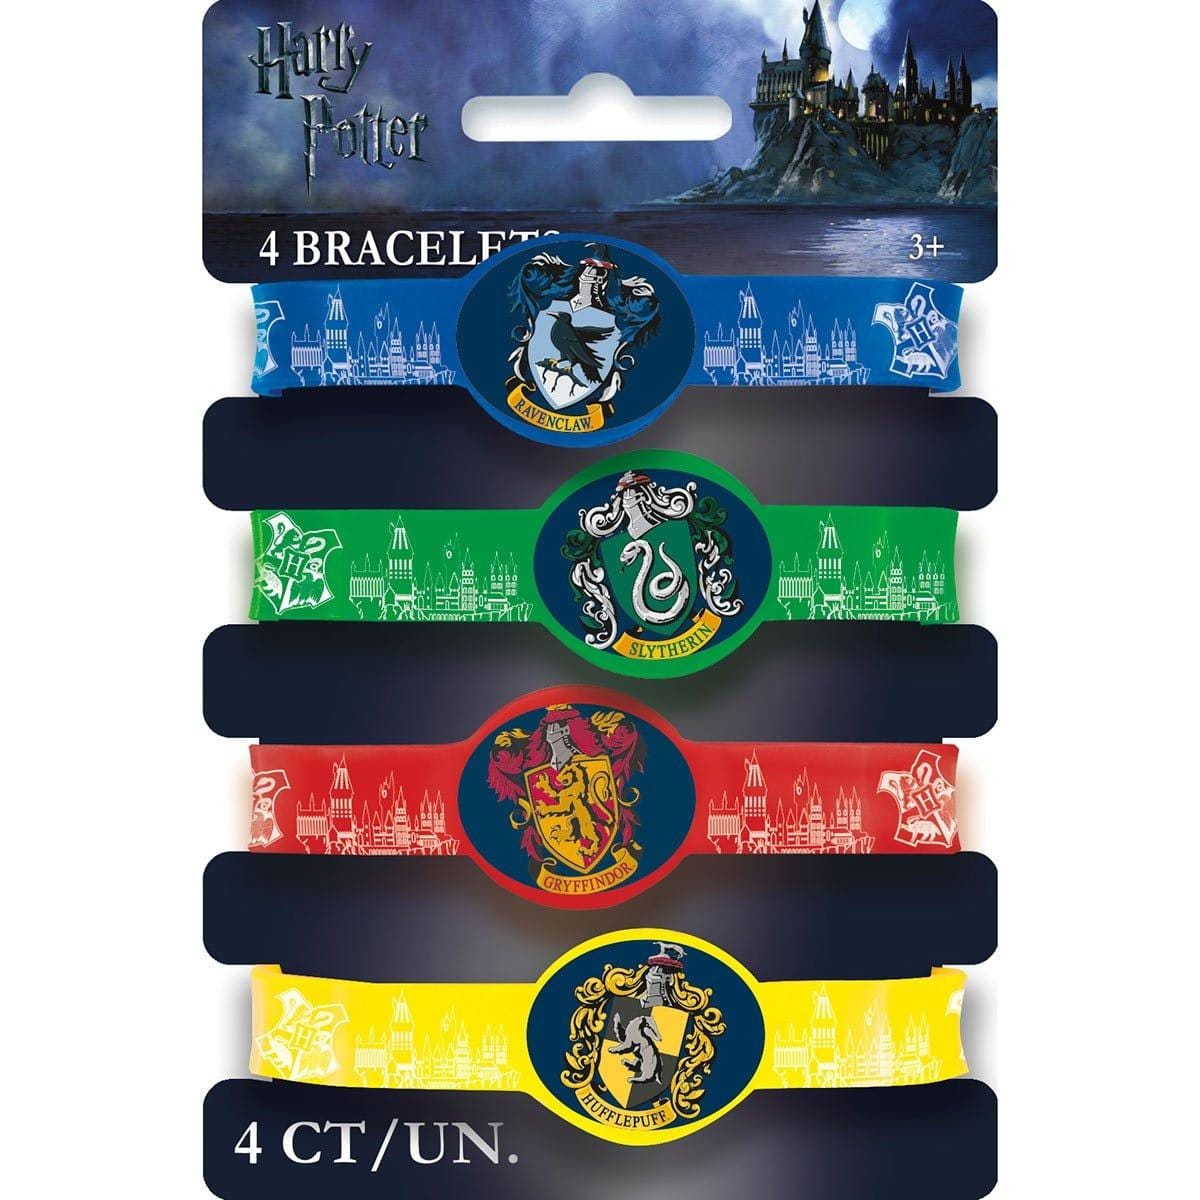 Buy Kids Birthday Harry Potter rubber bracelets, 4 per package sold at Party Expert